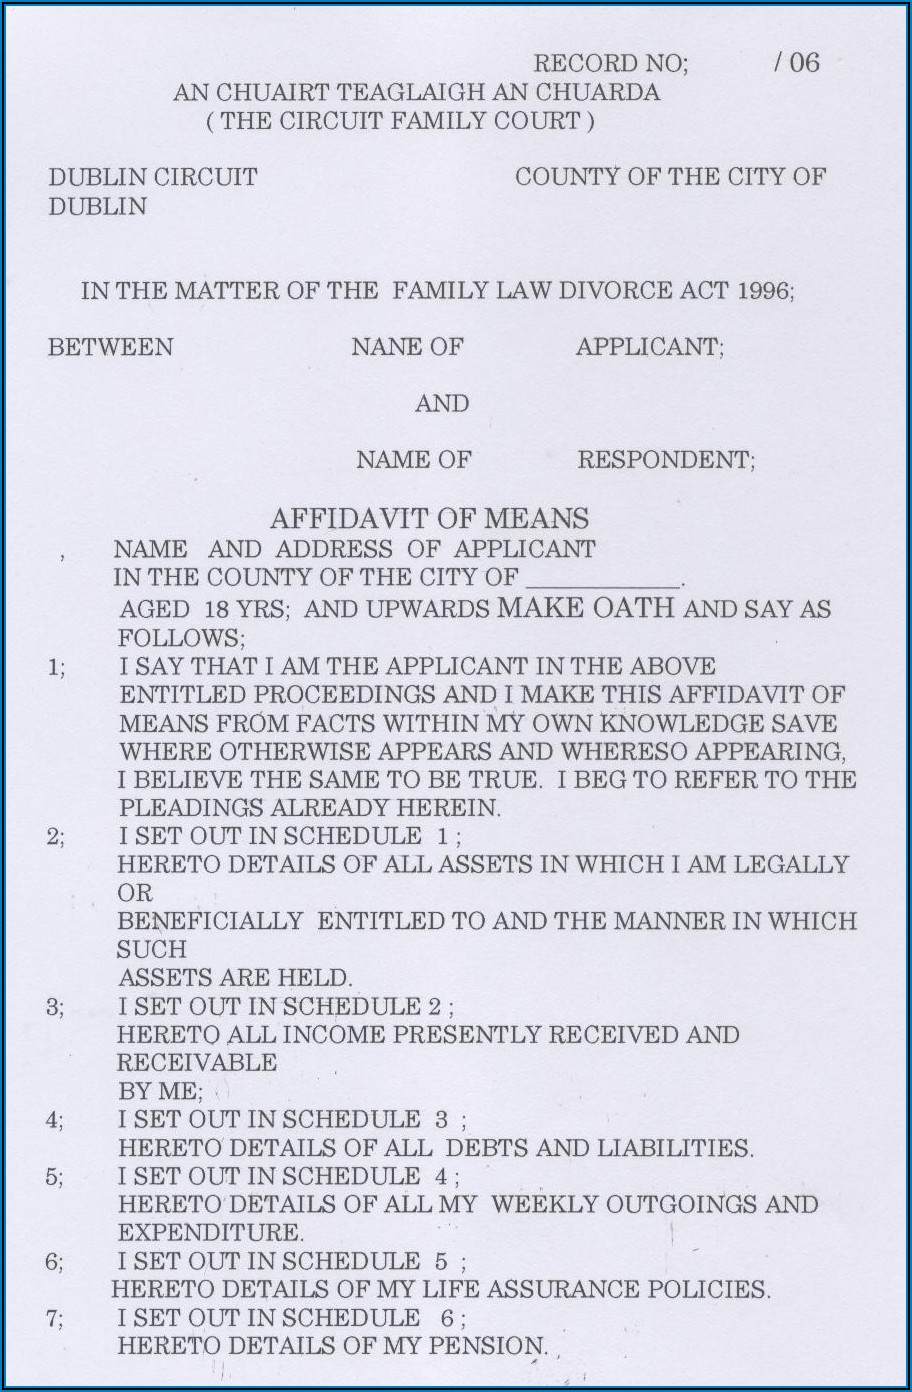 Application Form For Divorce In Ireland